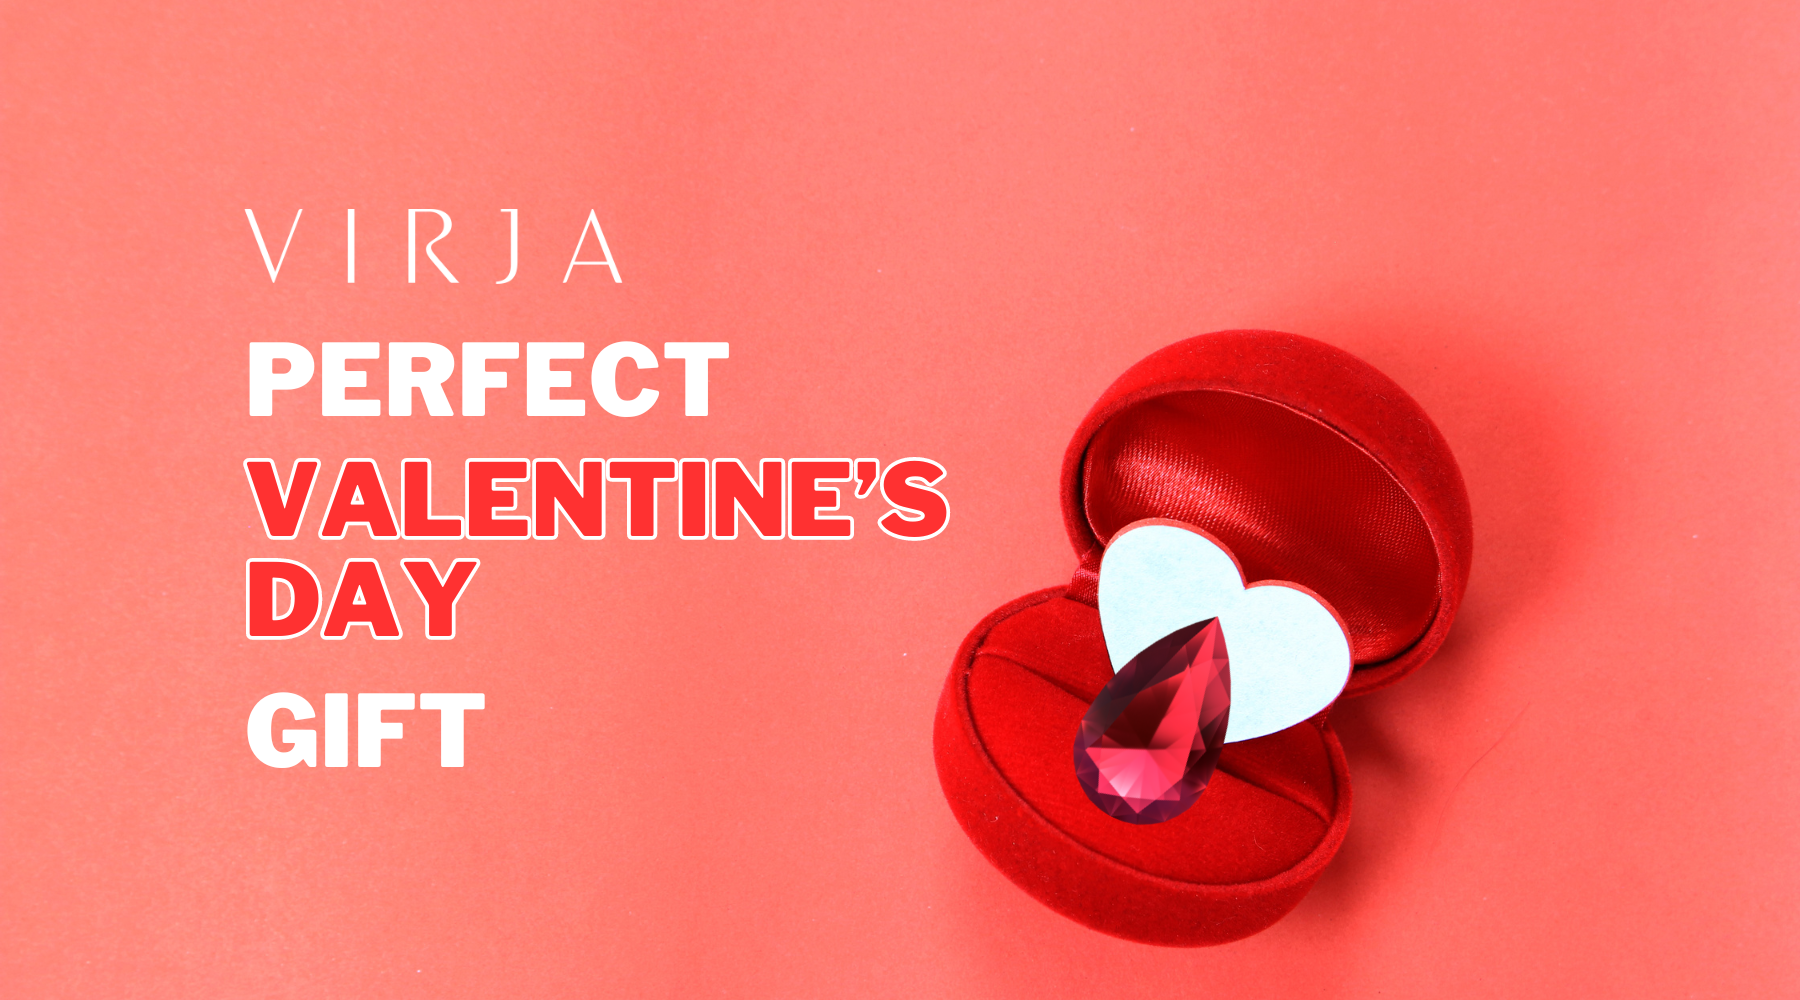 Virja's Ultimate Guide to Choosing the Perfect Valentine's Day Jewelry Gift